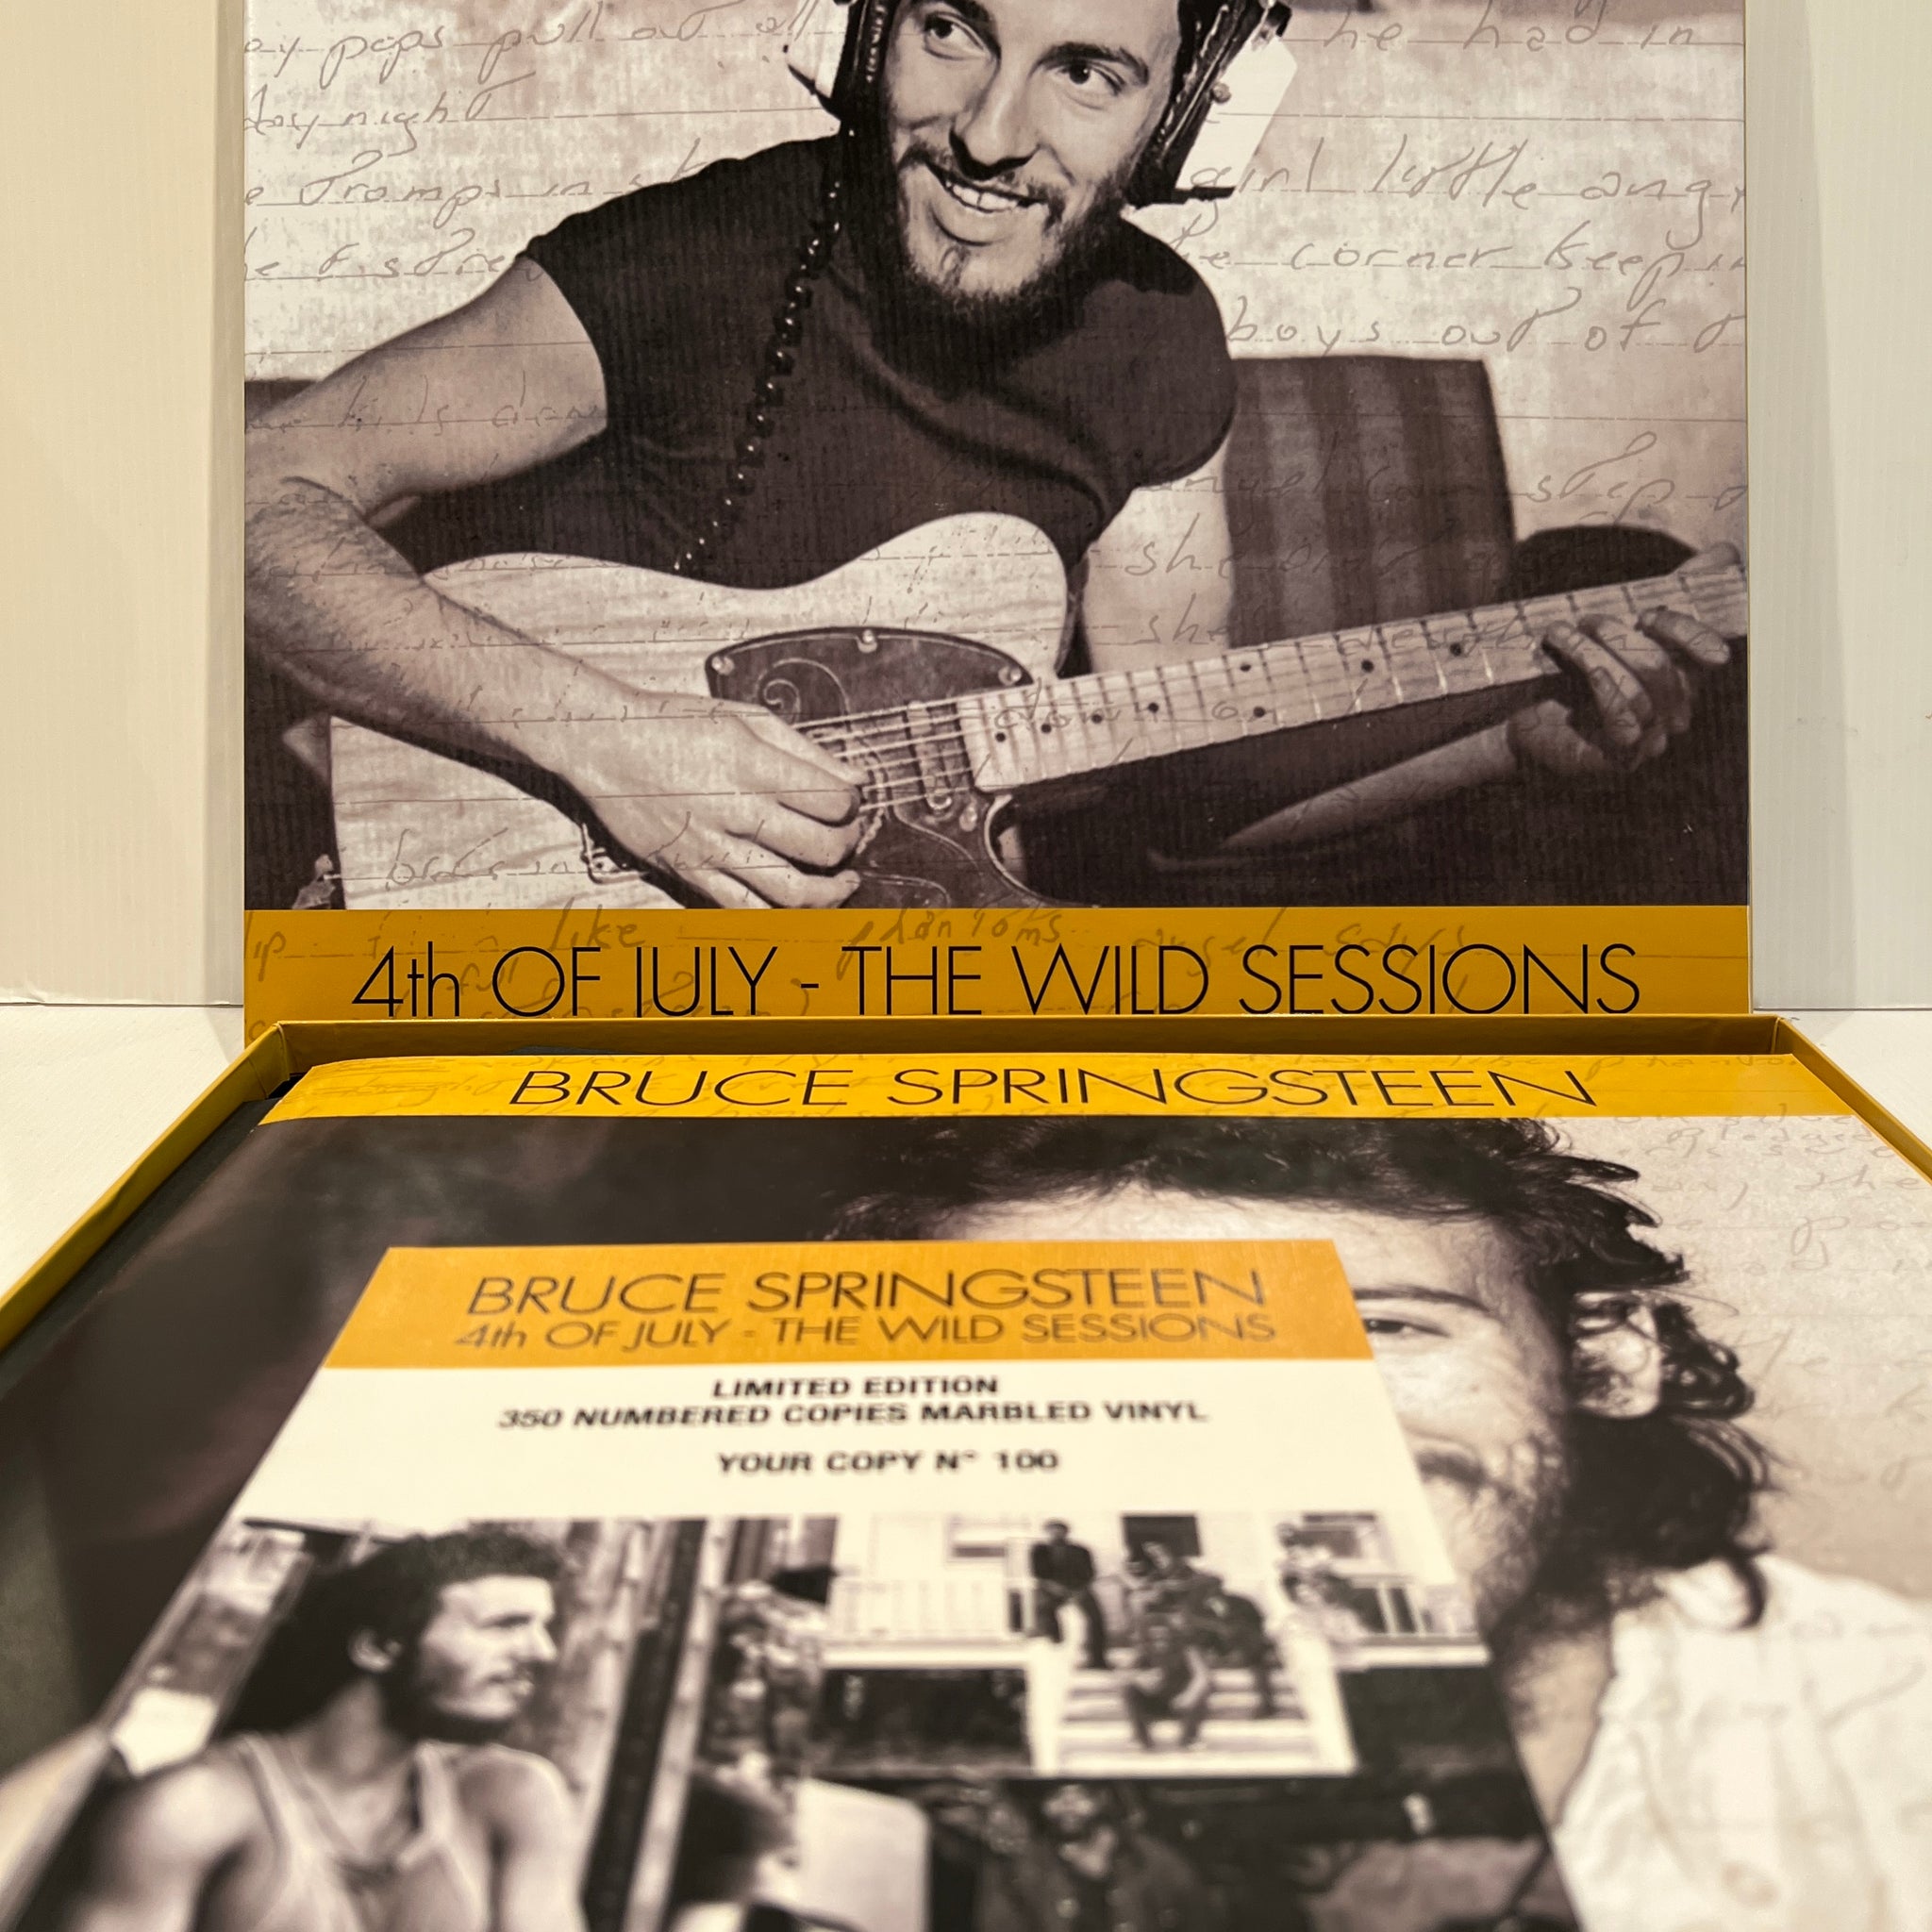 Springsteen - of July. Wild Sessions -Rare limited – rockrecordscollectors